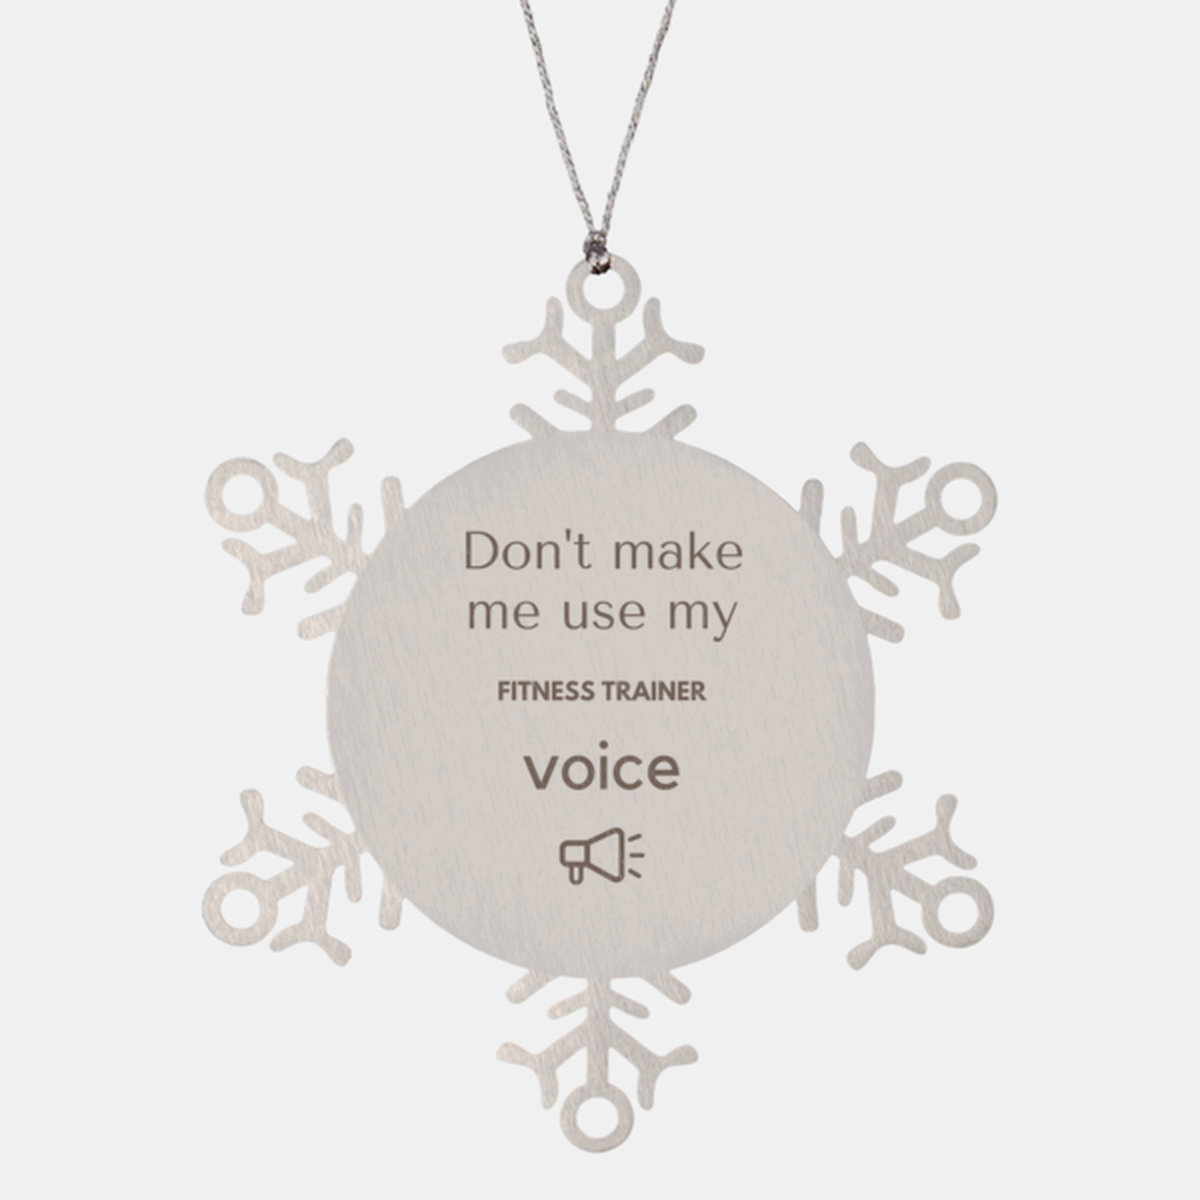 Don't make me use my Fitness Trainer voice, Sarcasm Fitness Trainer Ornament Gifts, Christmas Fitness Trainer Snowflake Ornament Unique Gifts For Fitness Trainer Coworkers, Men, Women, Colleague, Friends